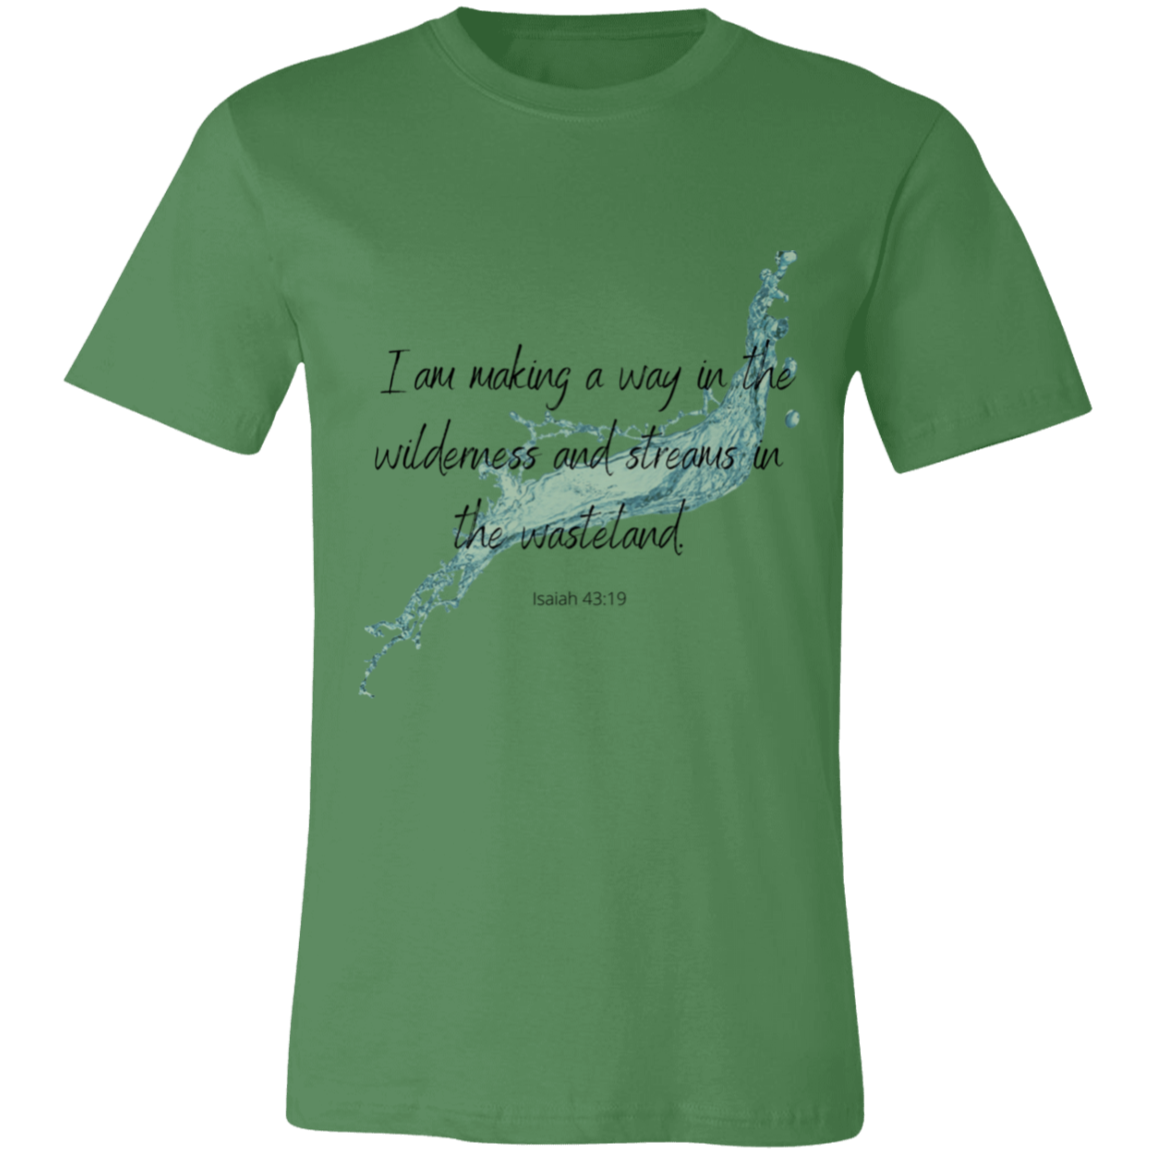 Streams in the Wilderness Jersey Short-Sleeve T-Shirt